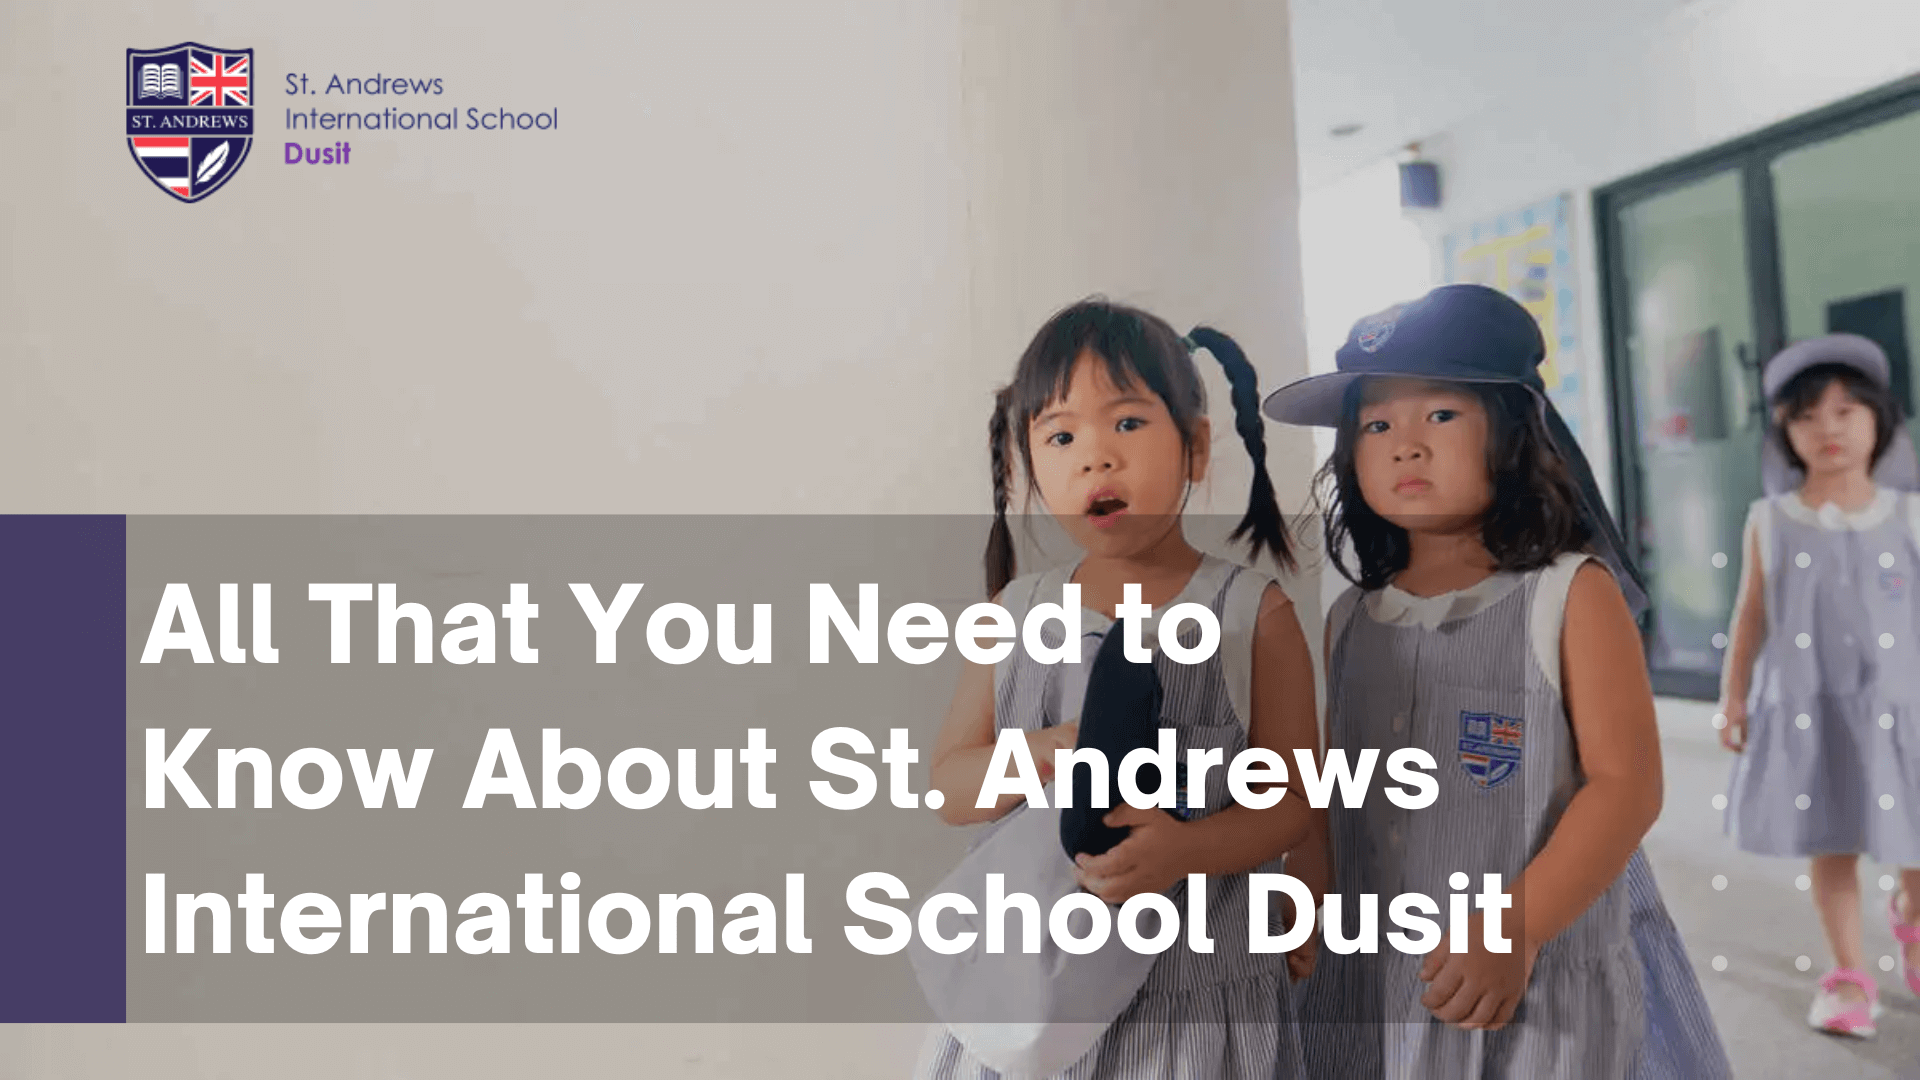 All That You Need to Know About St. Andrews International School Dusit